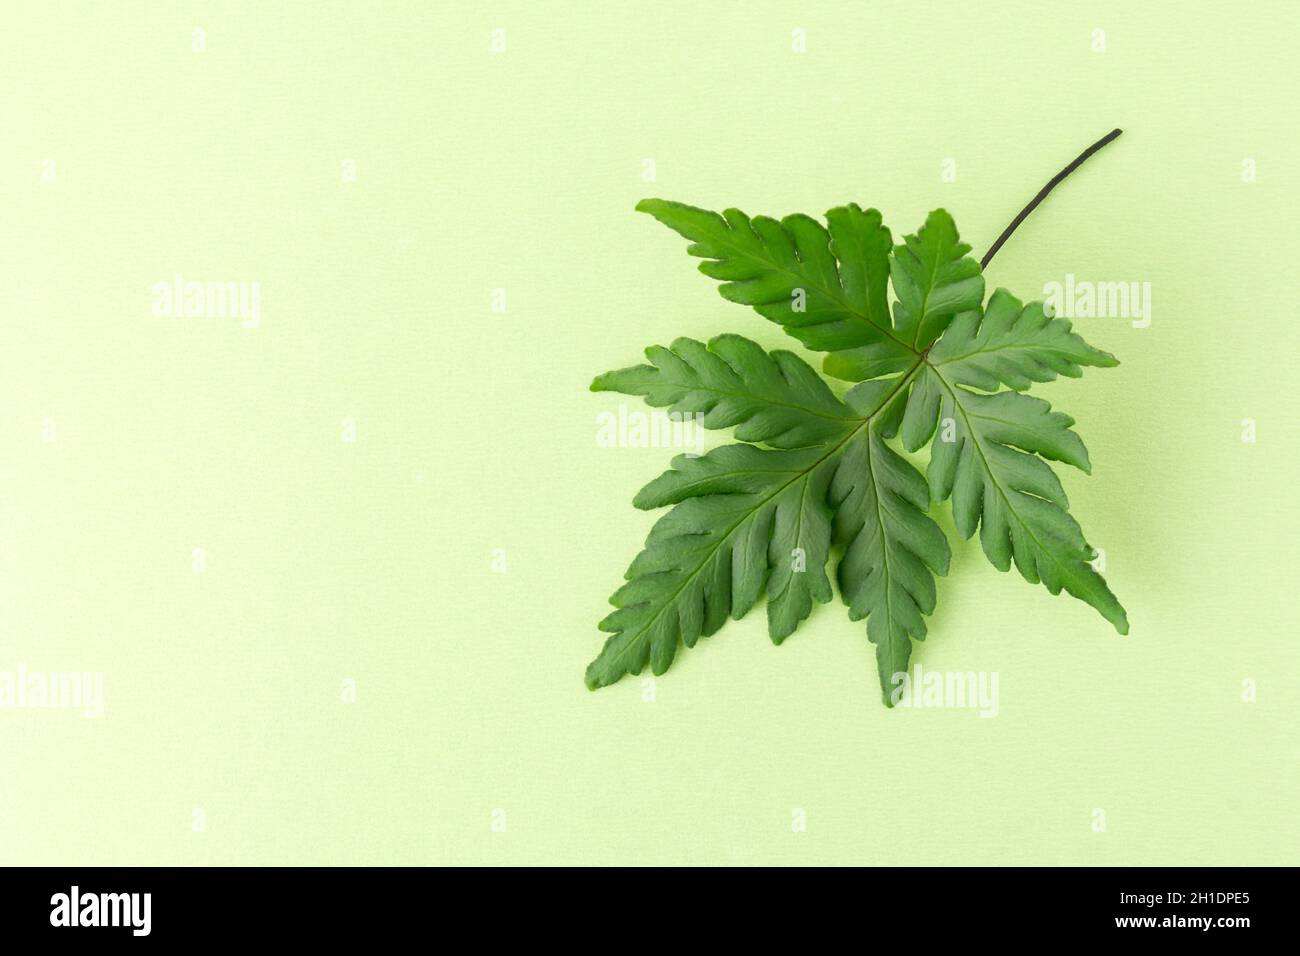 green leaf foliage on a light green background, taken from above with copy space, wallpaper abstract or template Stock Photo